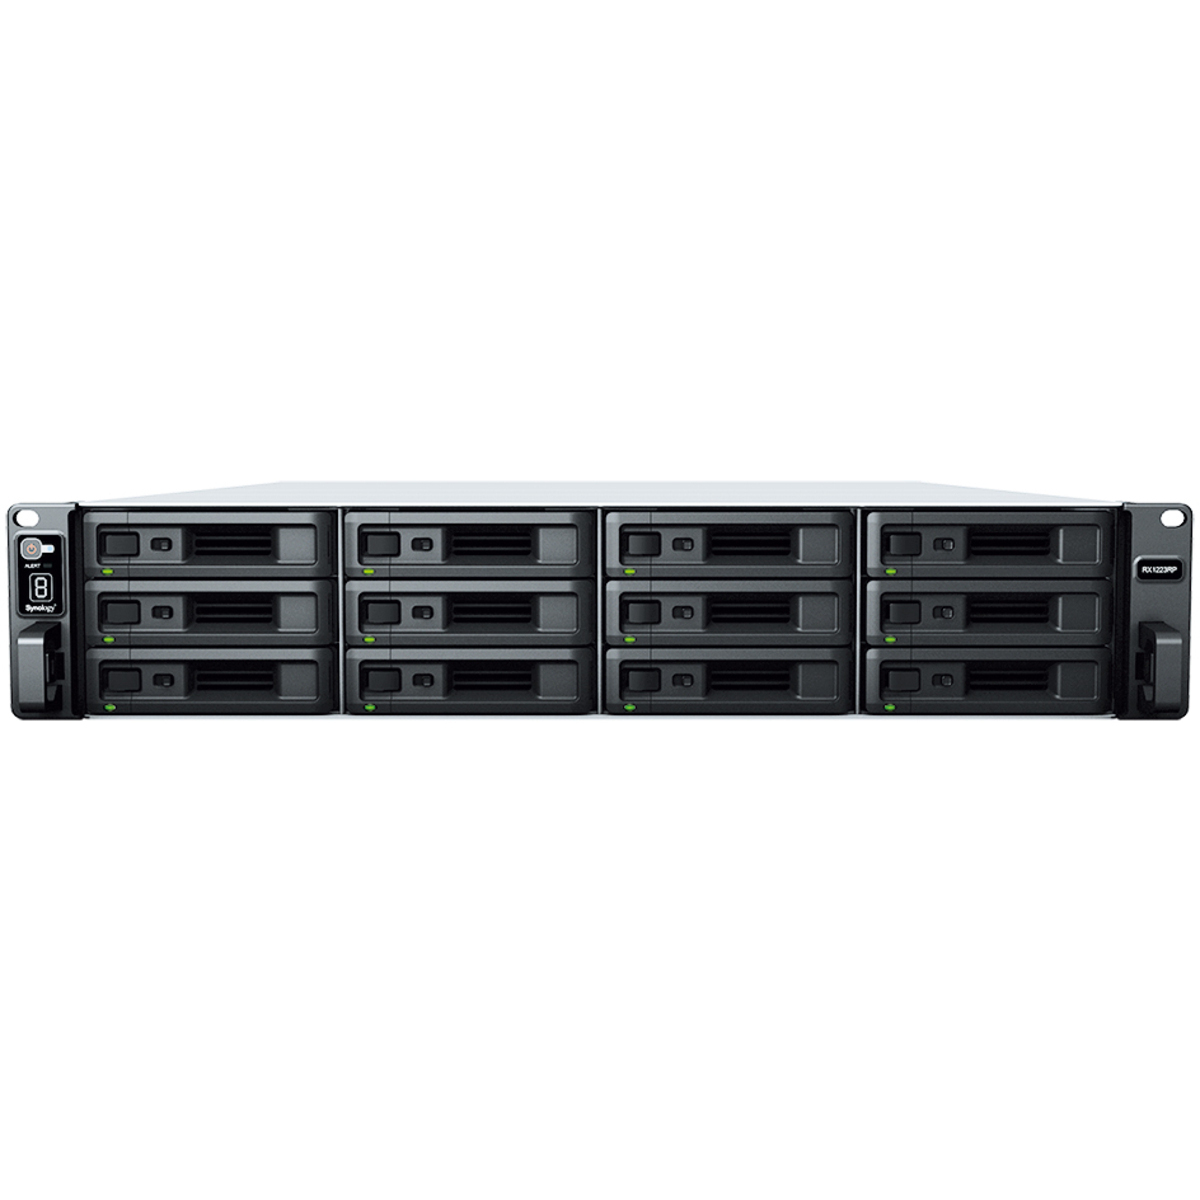 Synology RX1223RP External Expansion Drive 144tb 12-Bay RackMount Large Business / Enterprise Expansion Enclosure 8x18tb Seagate IronWolf Pro ST18000NT001 3.5 7200rpm SATA 6Gb/s HDD NAS Class Drives Installed - Burn-In Tested RX1223RP External Expansion Drive